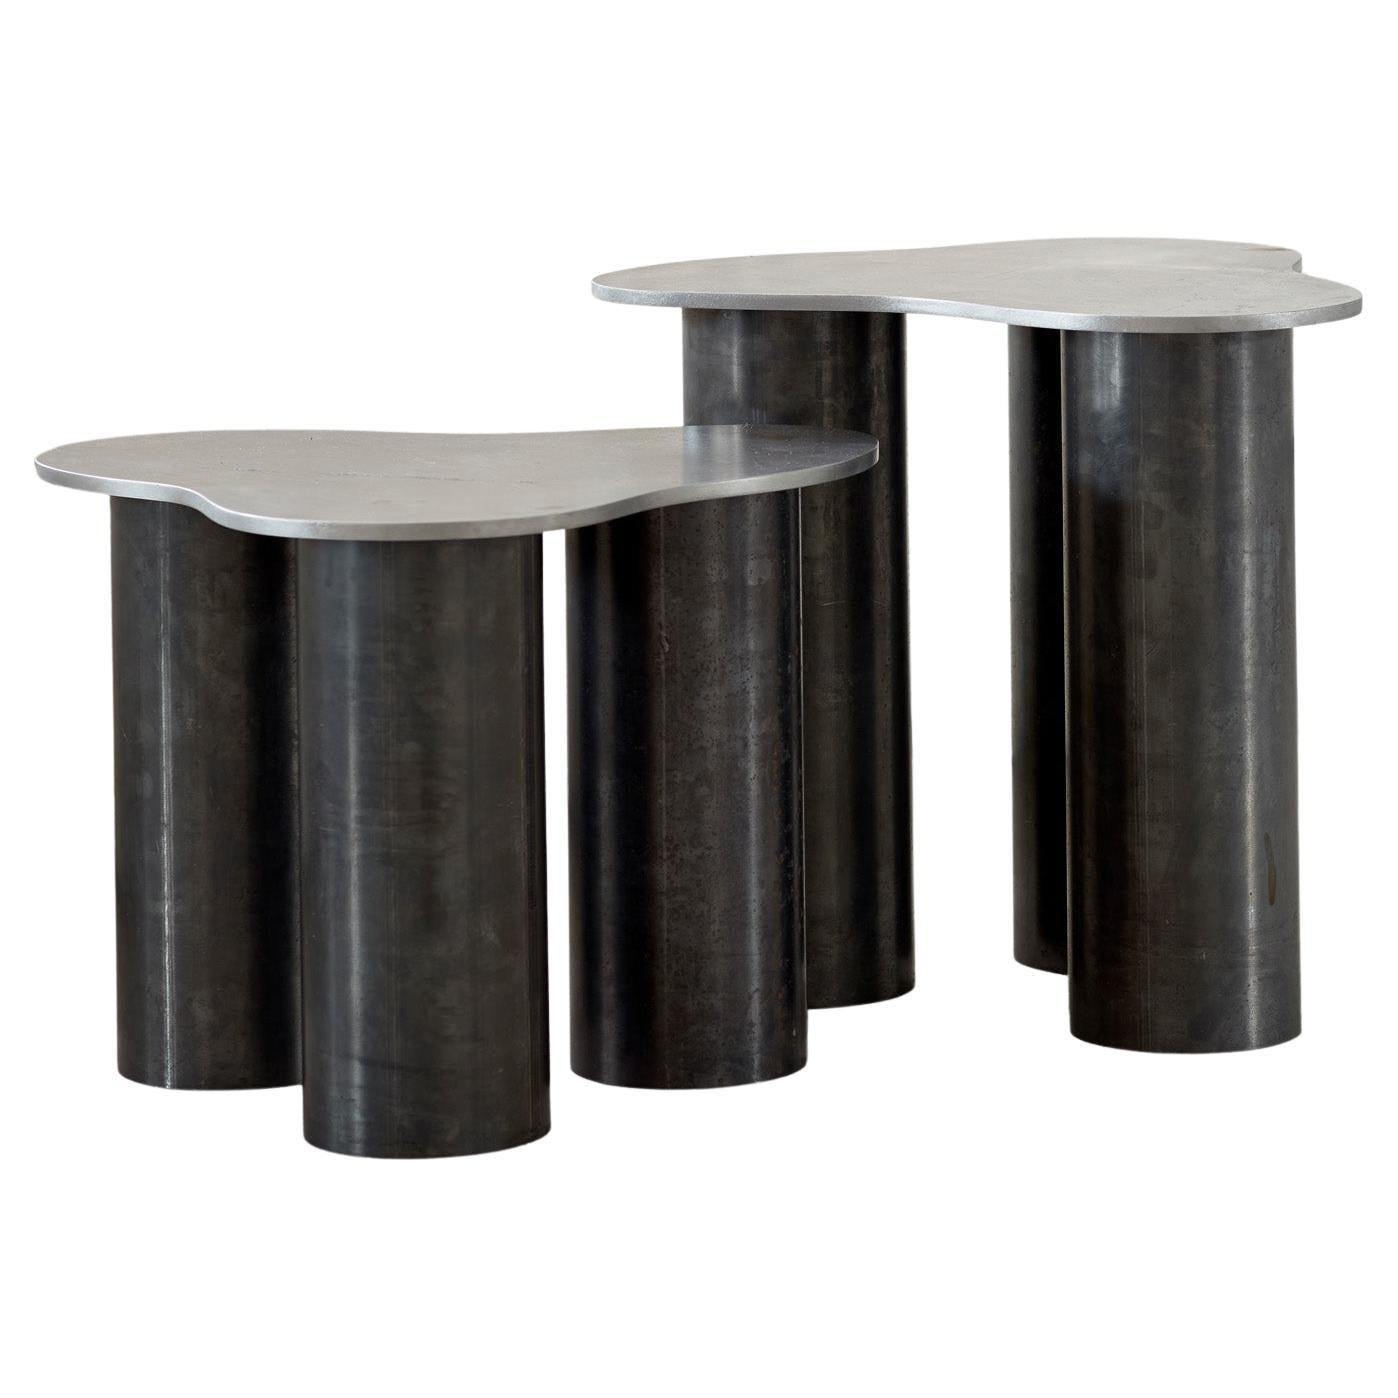 Set of two 001 'Tall and short' Side Tables by Archive for Space, UK 2020